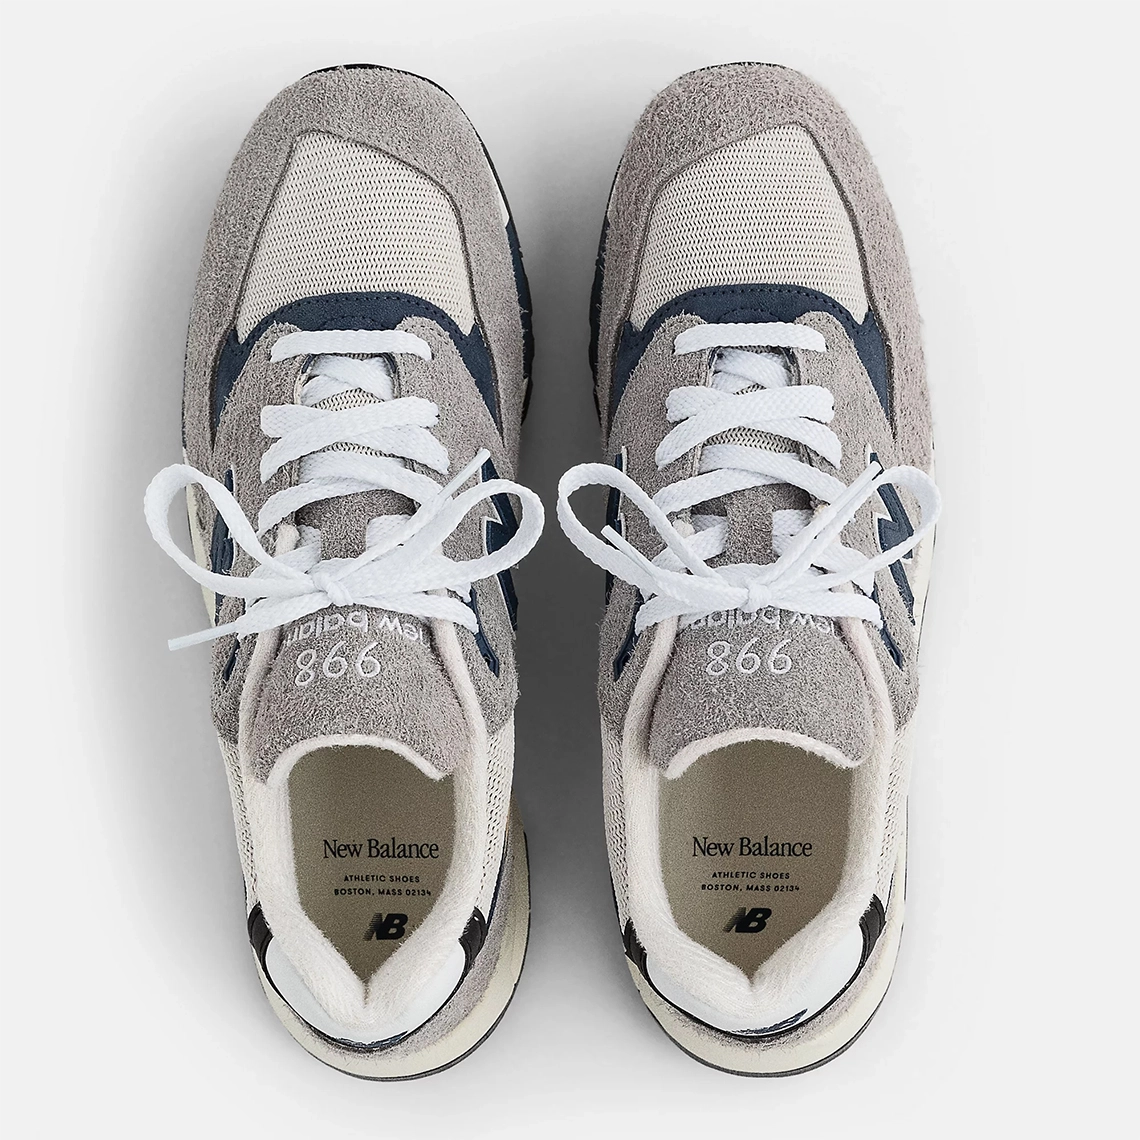 New Balance 998 Joins the Ranks of MADE in USA Models